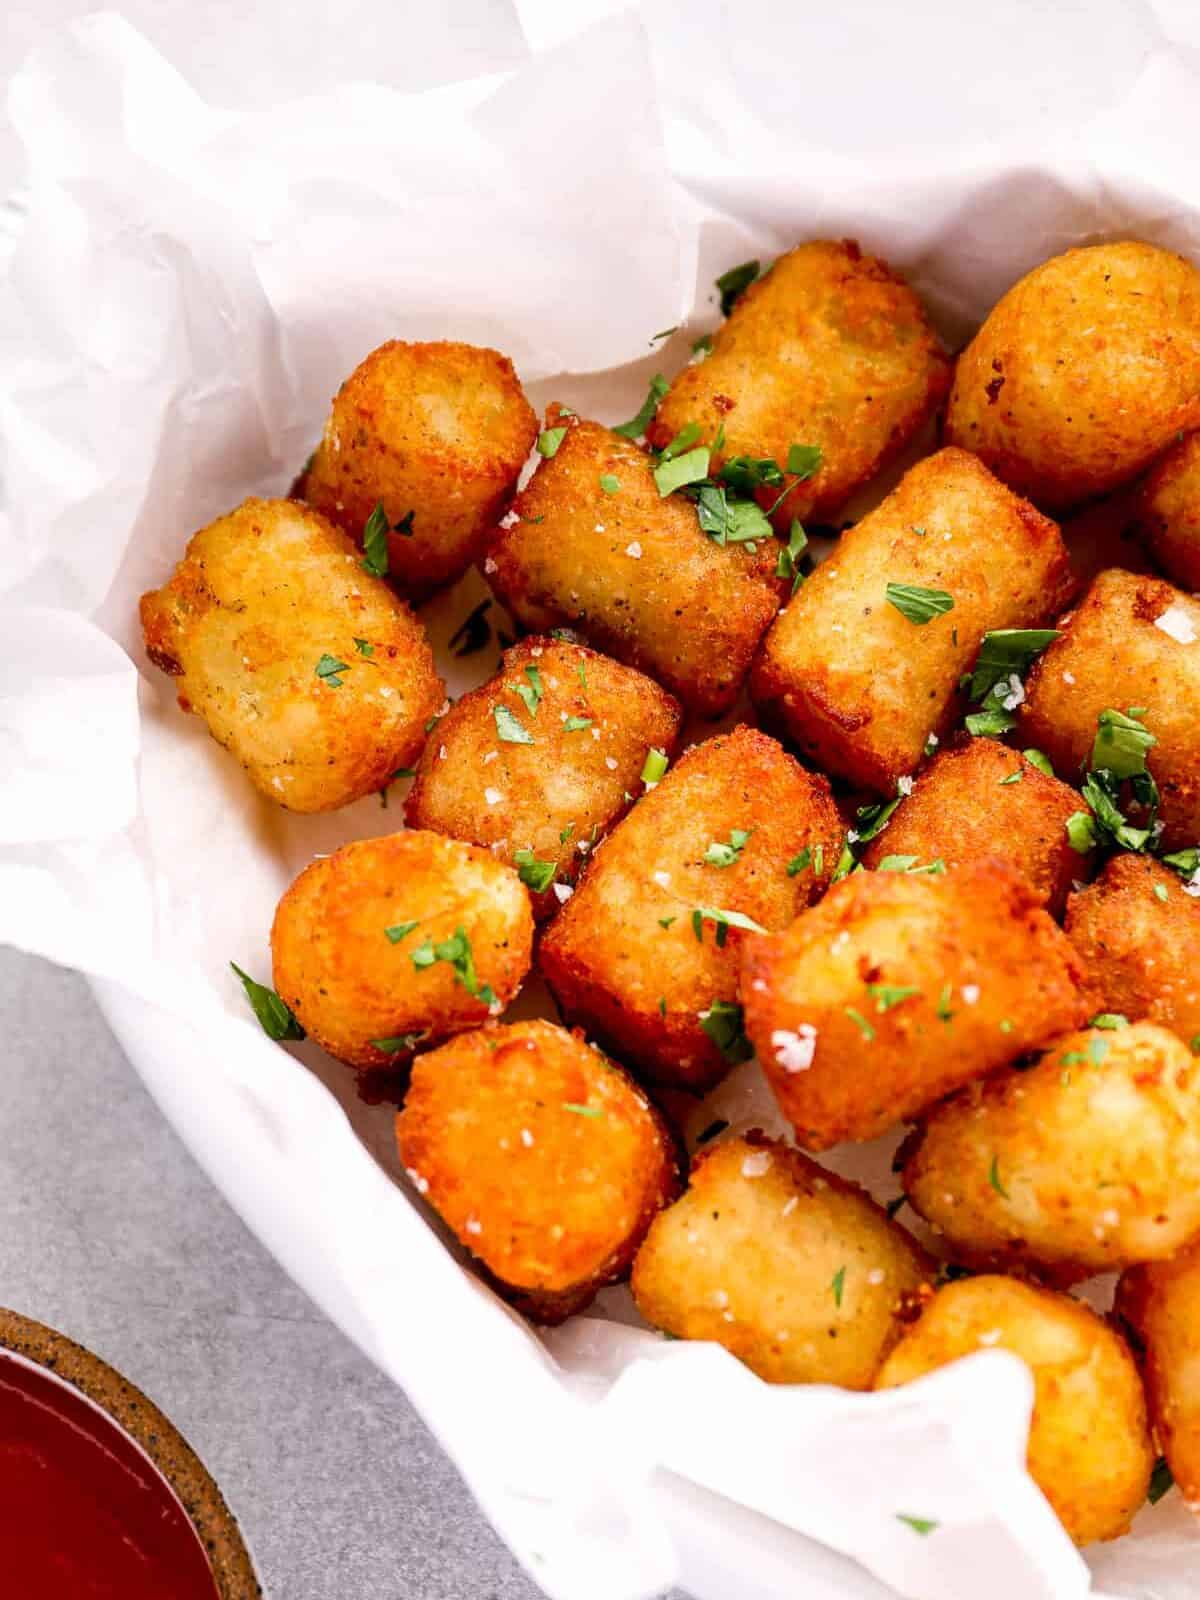 three-quarters view of homemade tater tots in a parchment-lined serving dish topped with parsley.